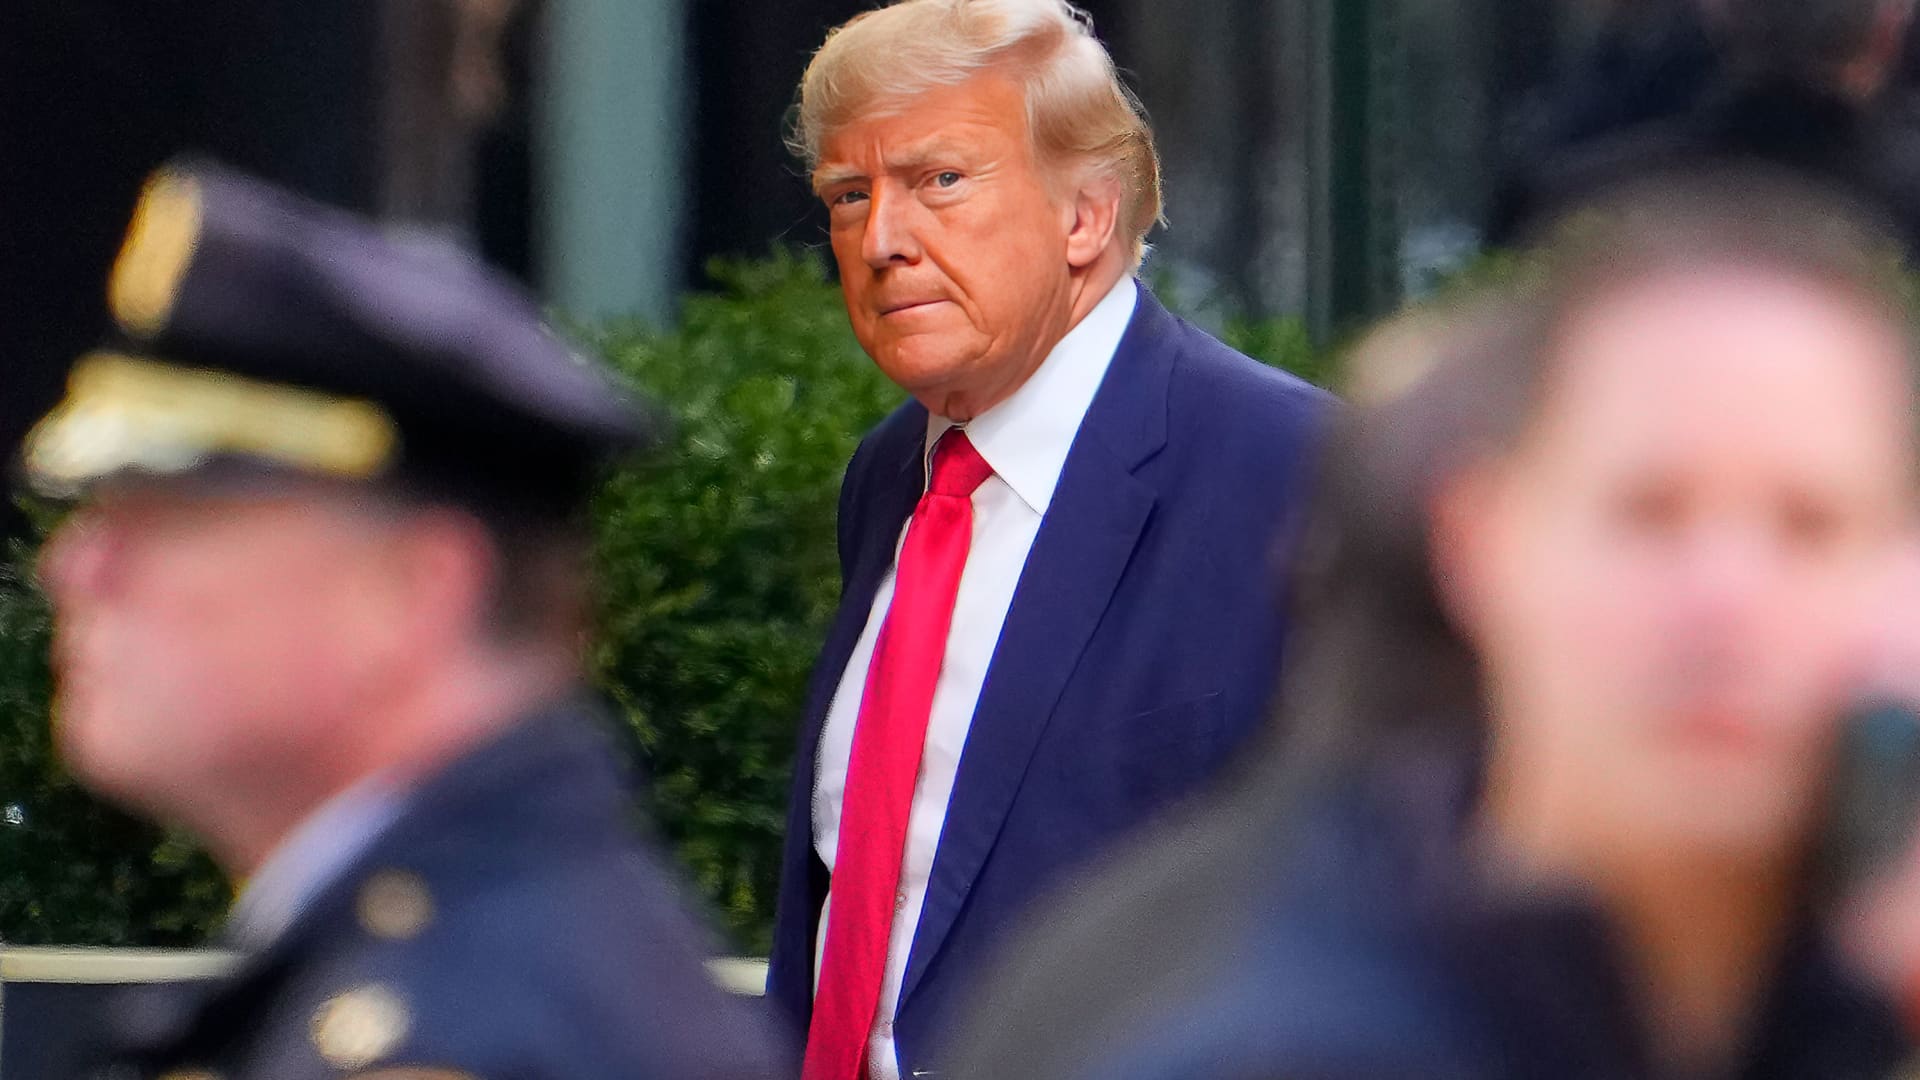 Former U.S. President Donald Trump arrives at Trump Tower on April 3, 2023 in New York City.